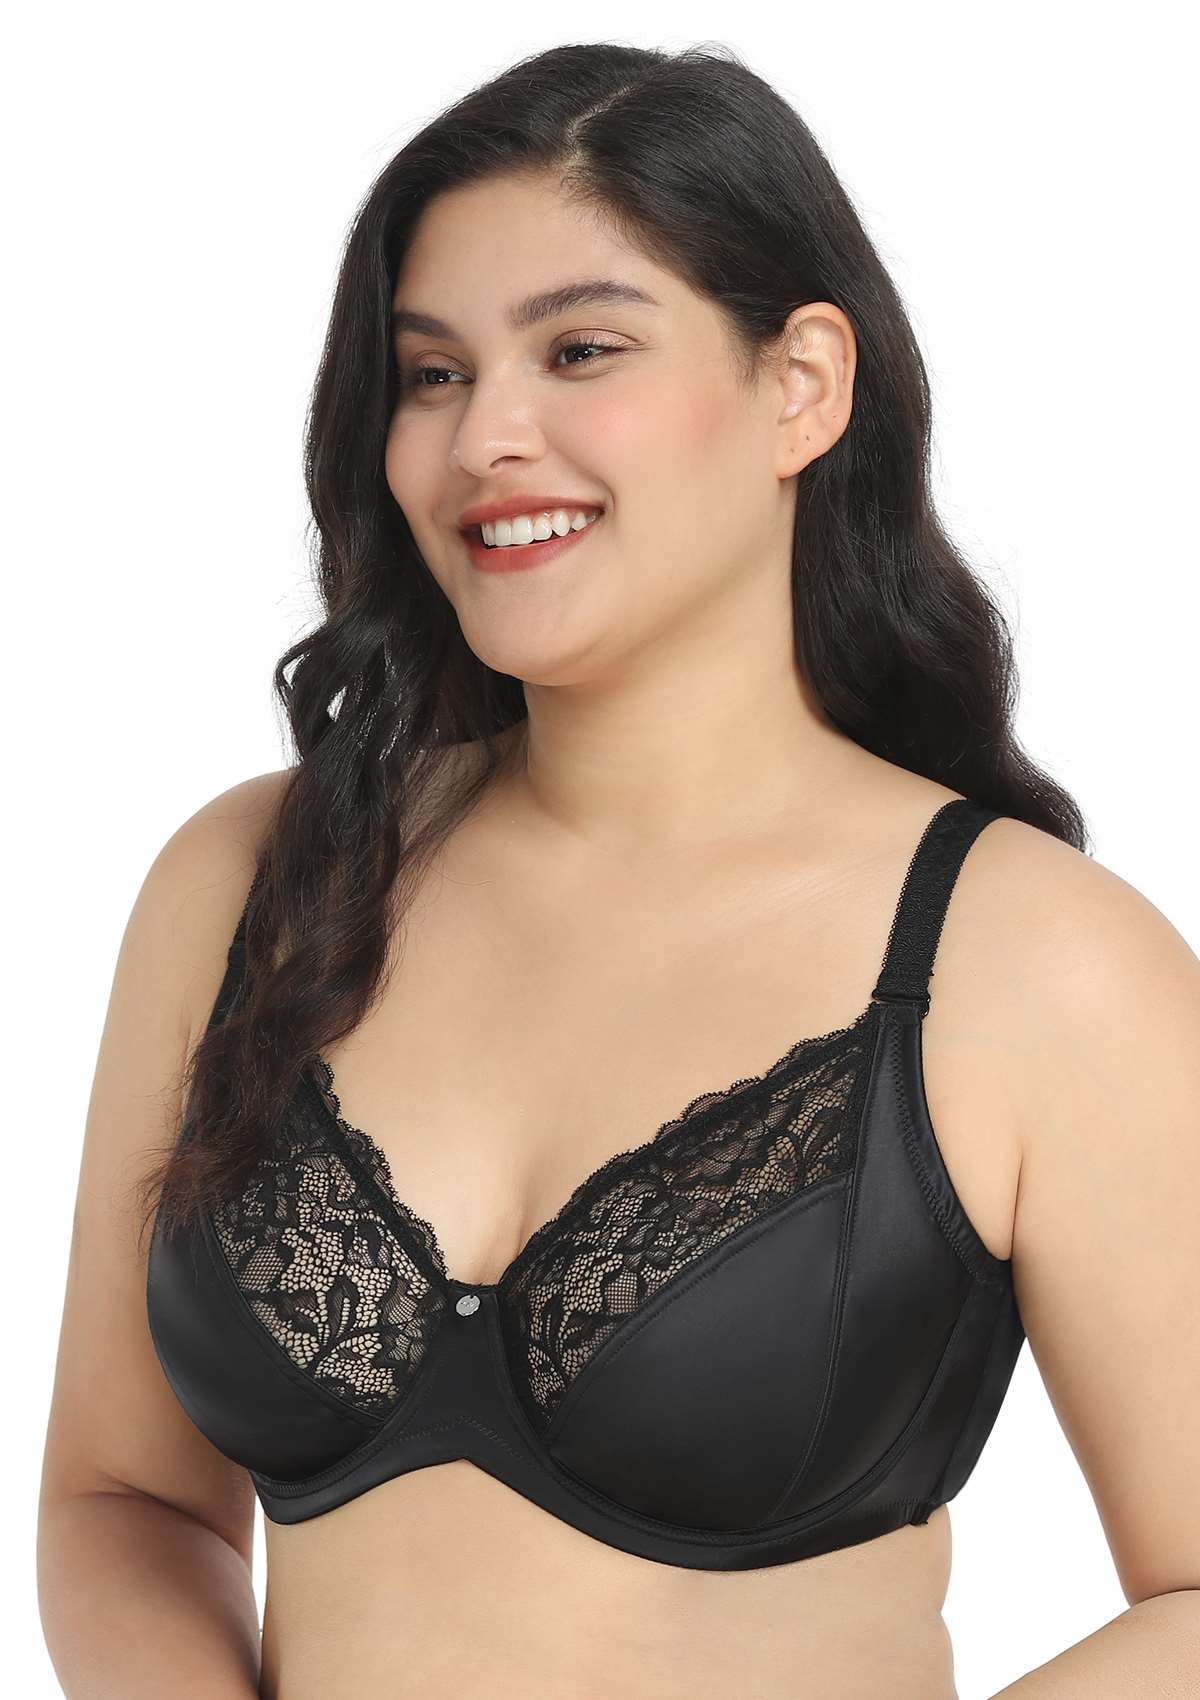 HSIA Foxy Satin Silky Full Coverage Underwire Bra With Floral Lace Trim - Black / 38 / H